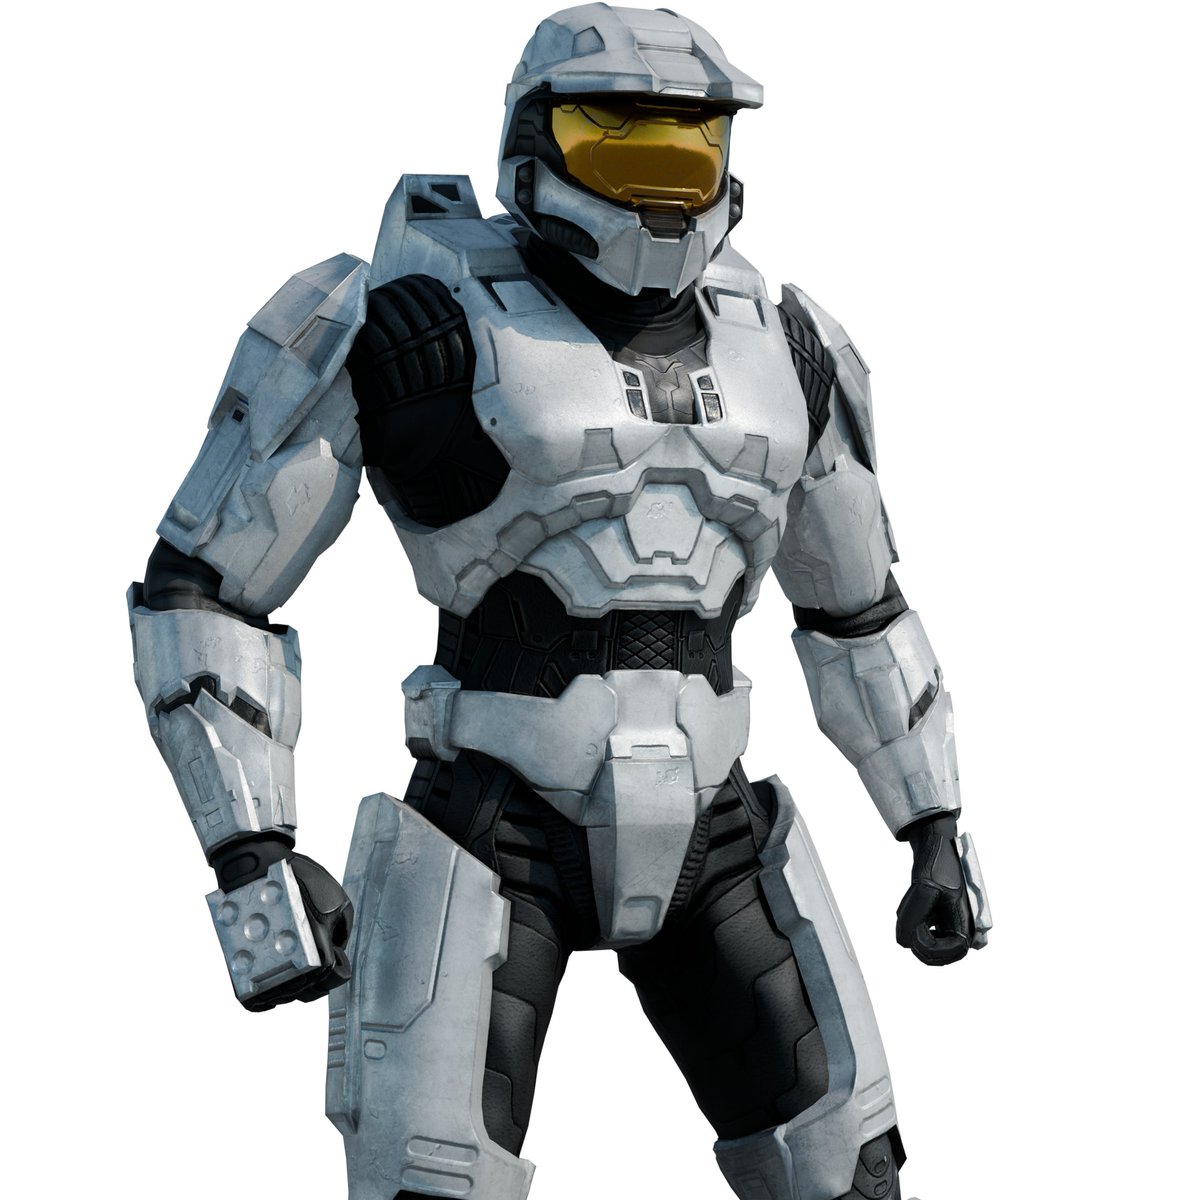 Here's a simple download for the H2A MP Spartan model I decided to put together, using Sierra's techsuit as well as the Infinite shaders for the armor pieces. Enjoy! drive.google.com/file/d/155xJjE…